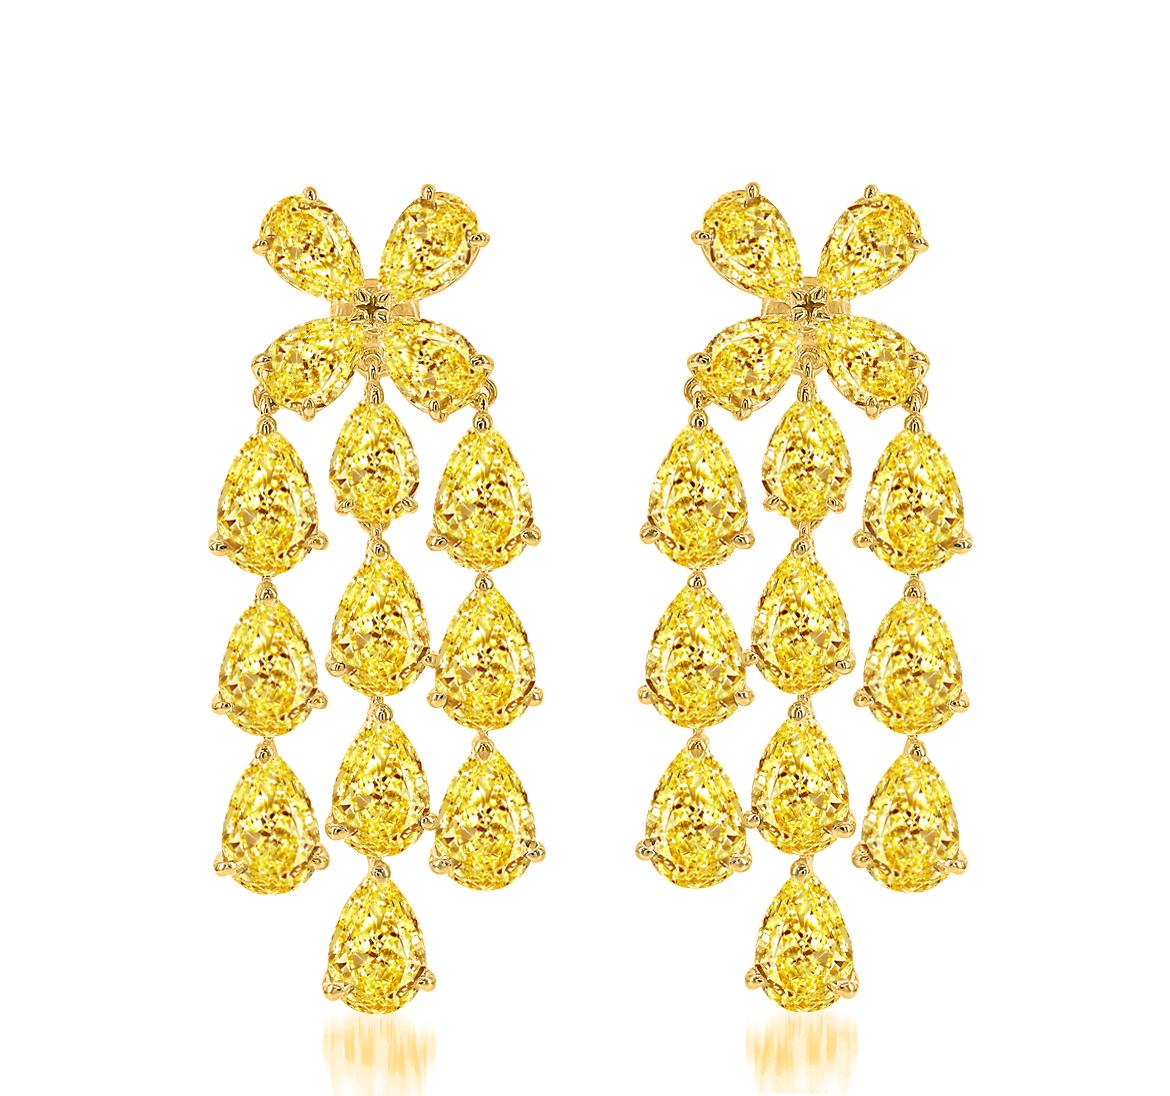 The Ultimate Yellow Diamond Drop Earrings

Beautiful Pear shaped Yellow Diamonds coming along for a sunburst of color and drop on the ears like a waterfall with the sun directly at it.

28 Diamonds weighing approximately 14.00 carats.

Set in 18